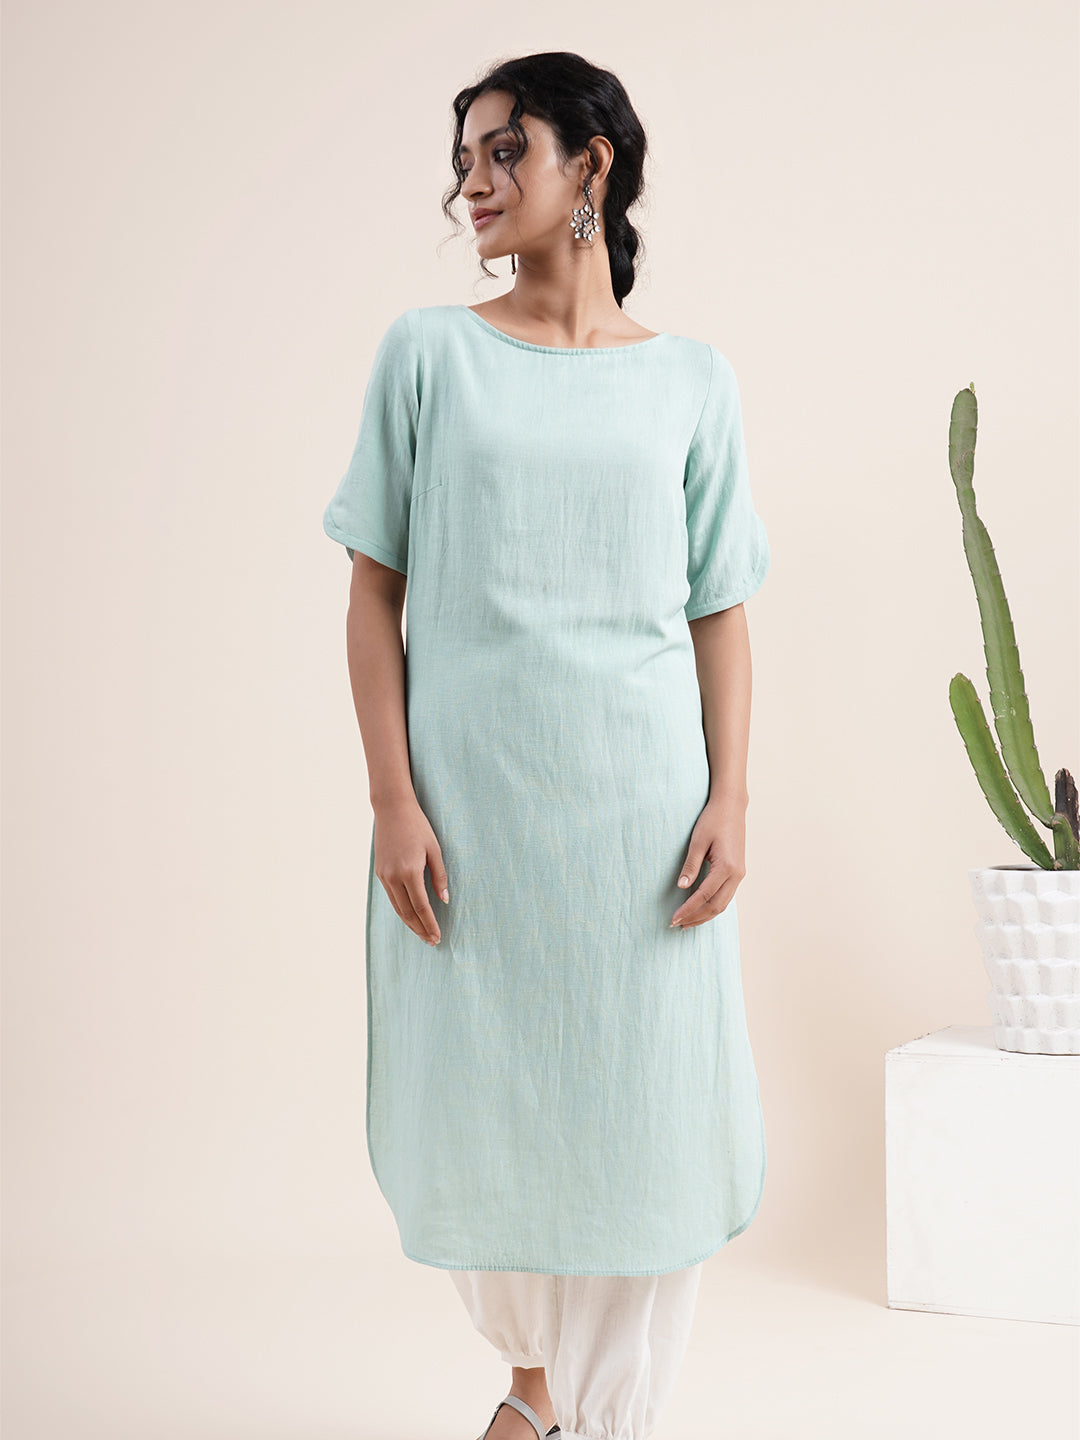 Mint Green Kurta with slit sleeves paired with Pathani pants